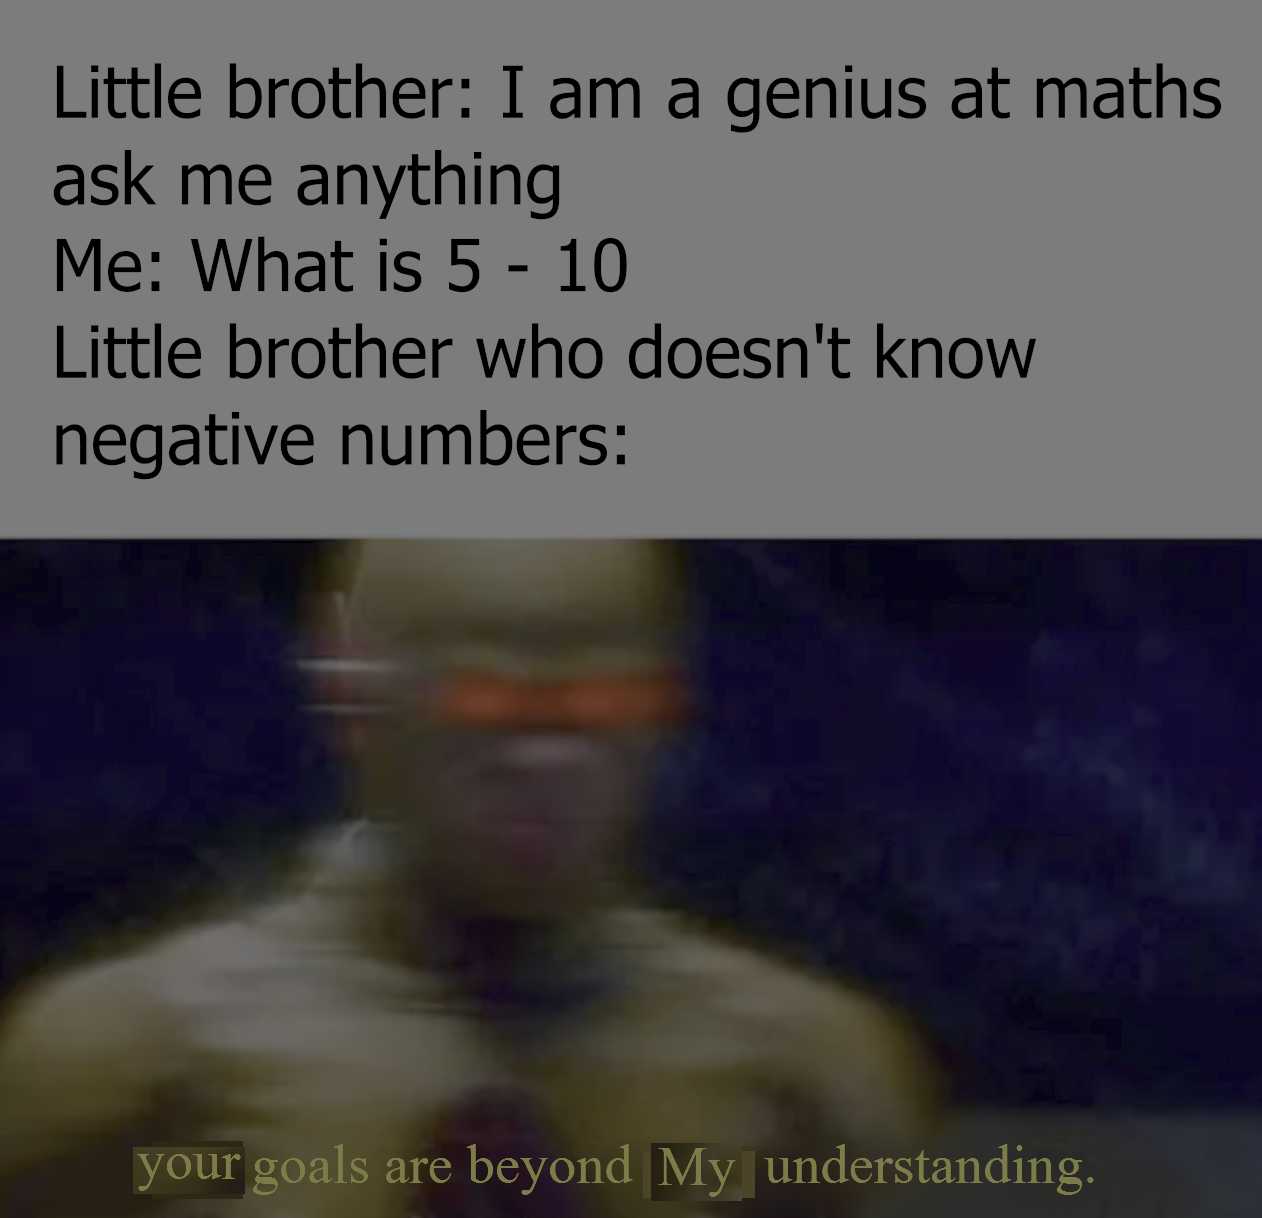 photo caption - Little brother I am a genius at maths ask me anything Me What is 5 10 Little brother who doesn't know negative numbers your goals are beyond My understanding.